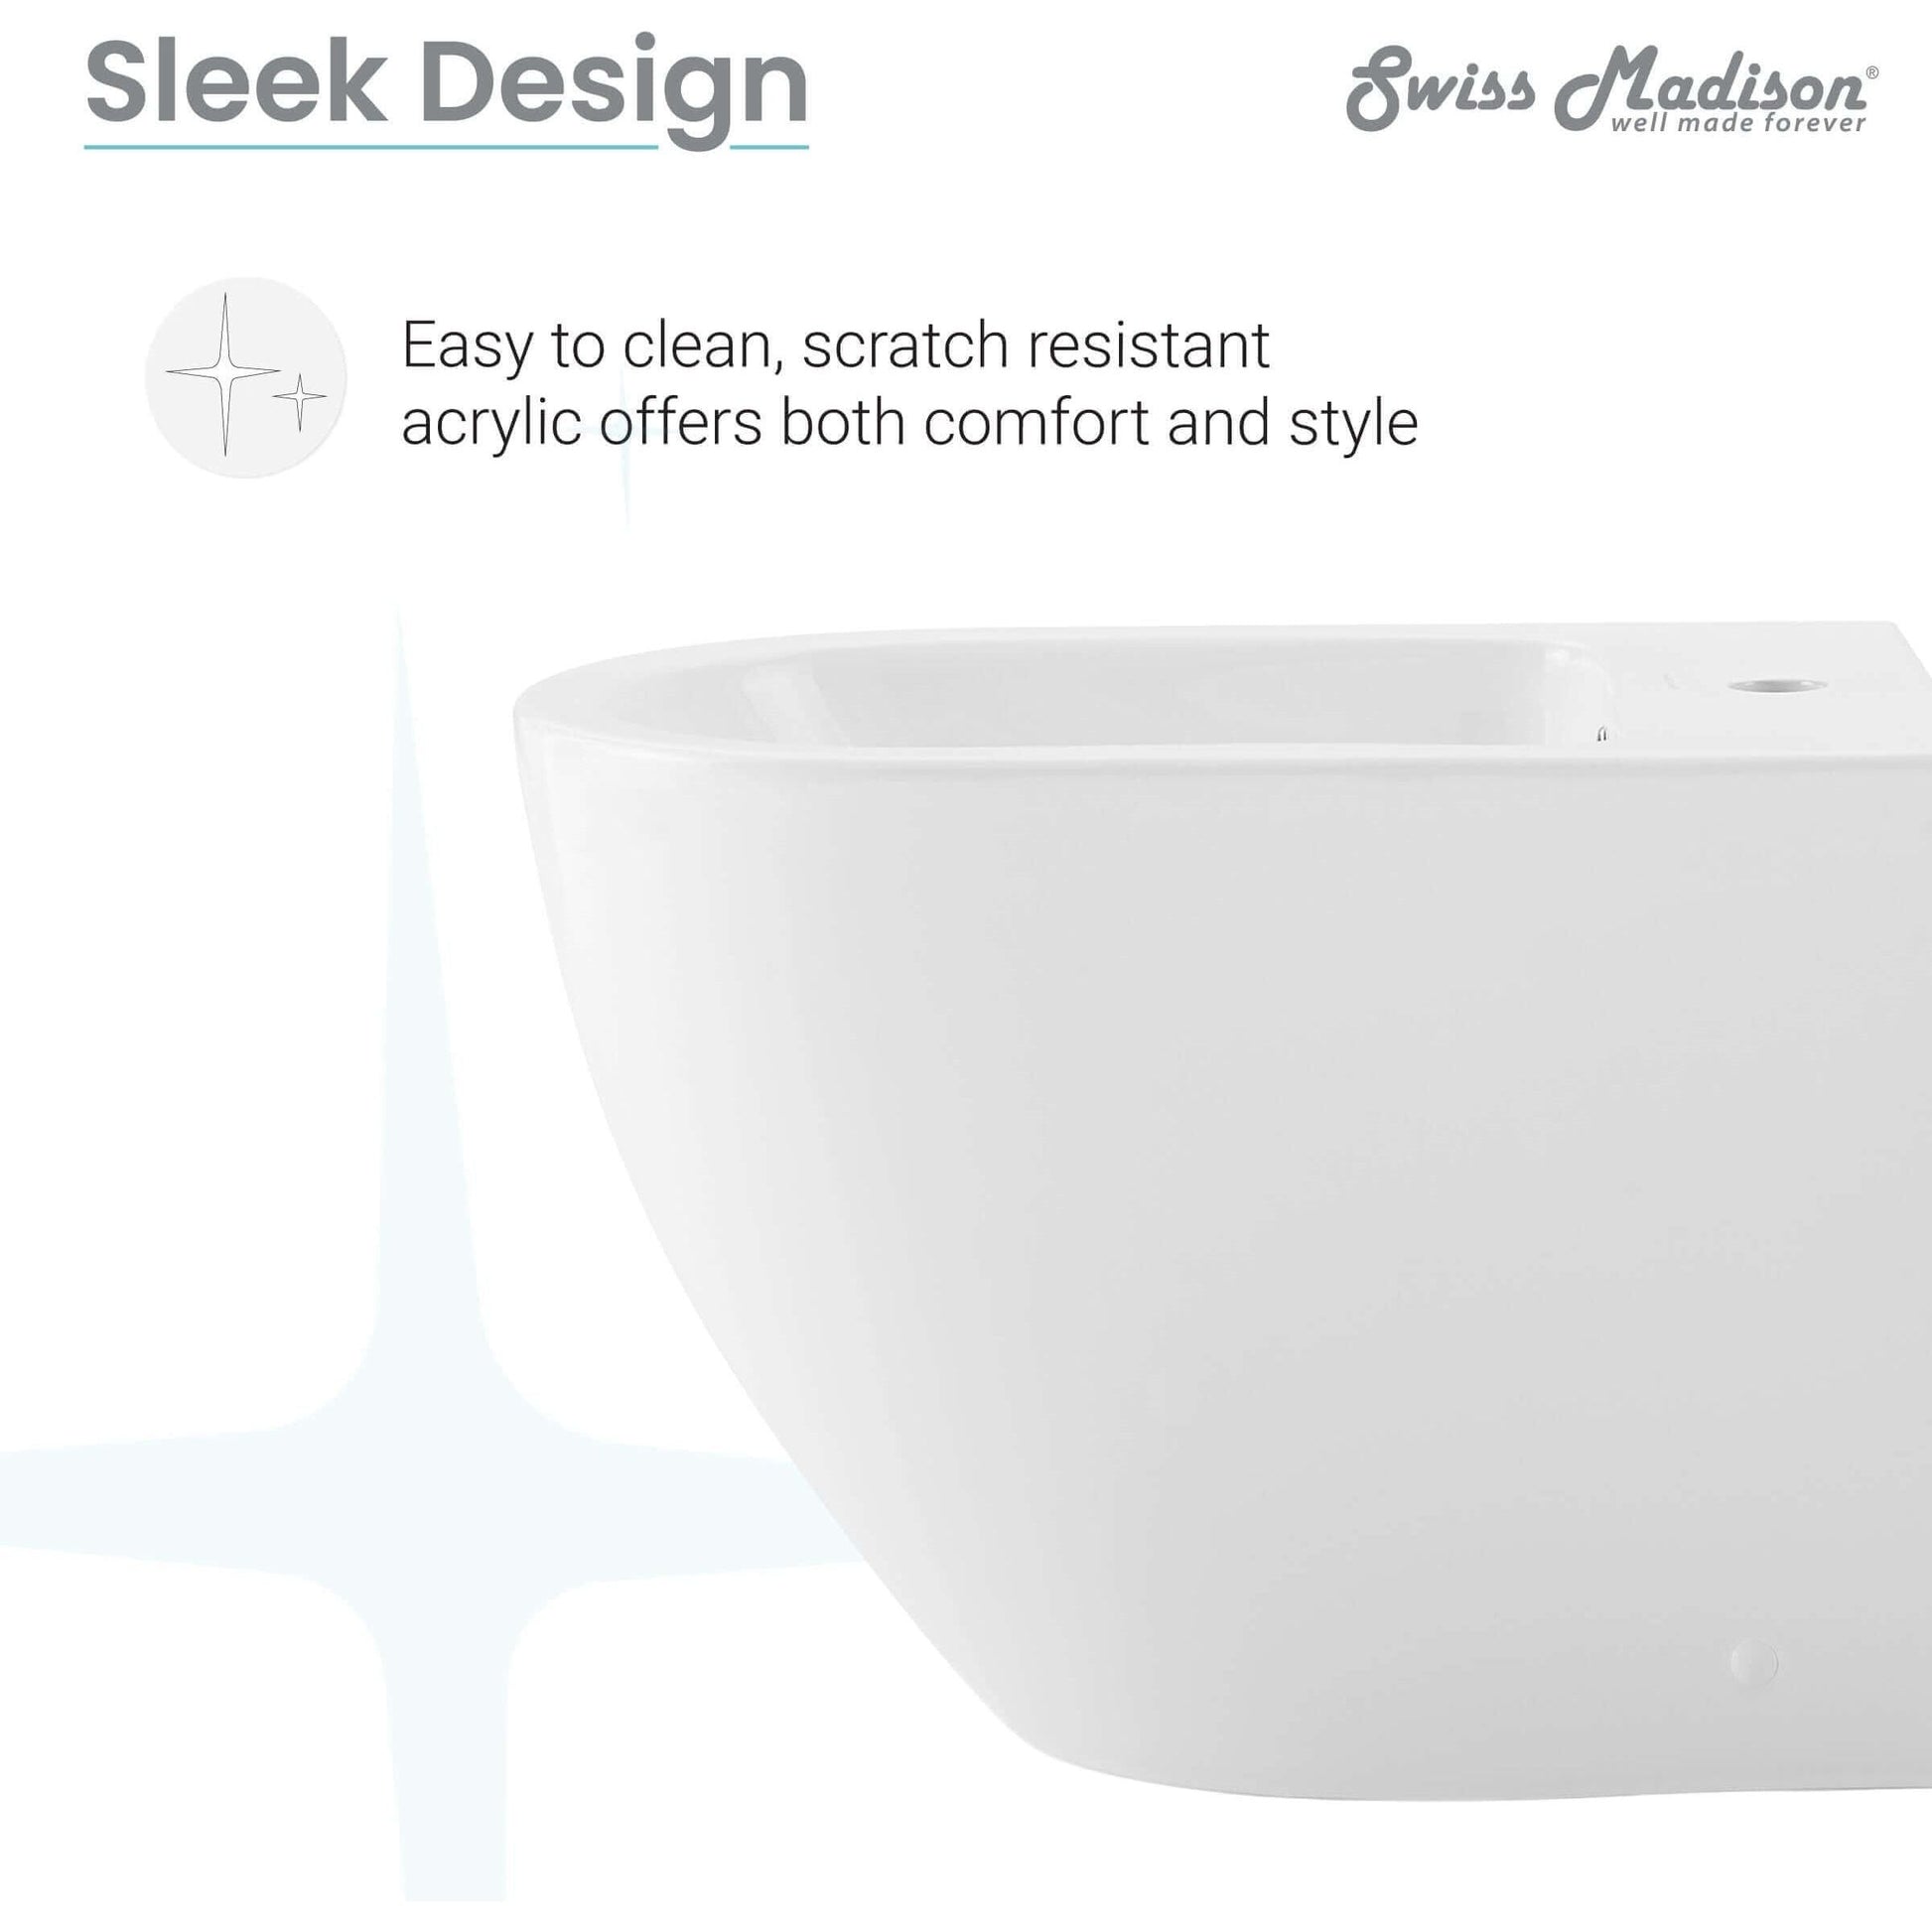 St. Tropez Bidet - side view with features listed